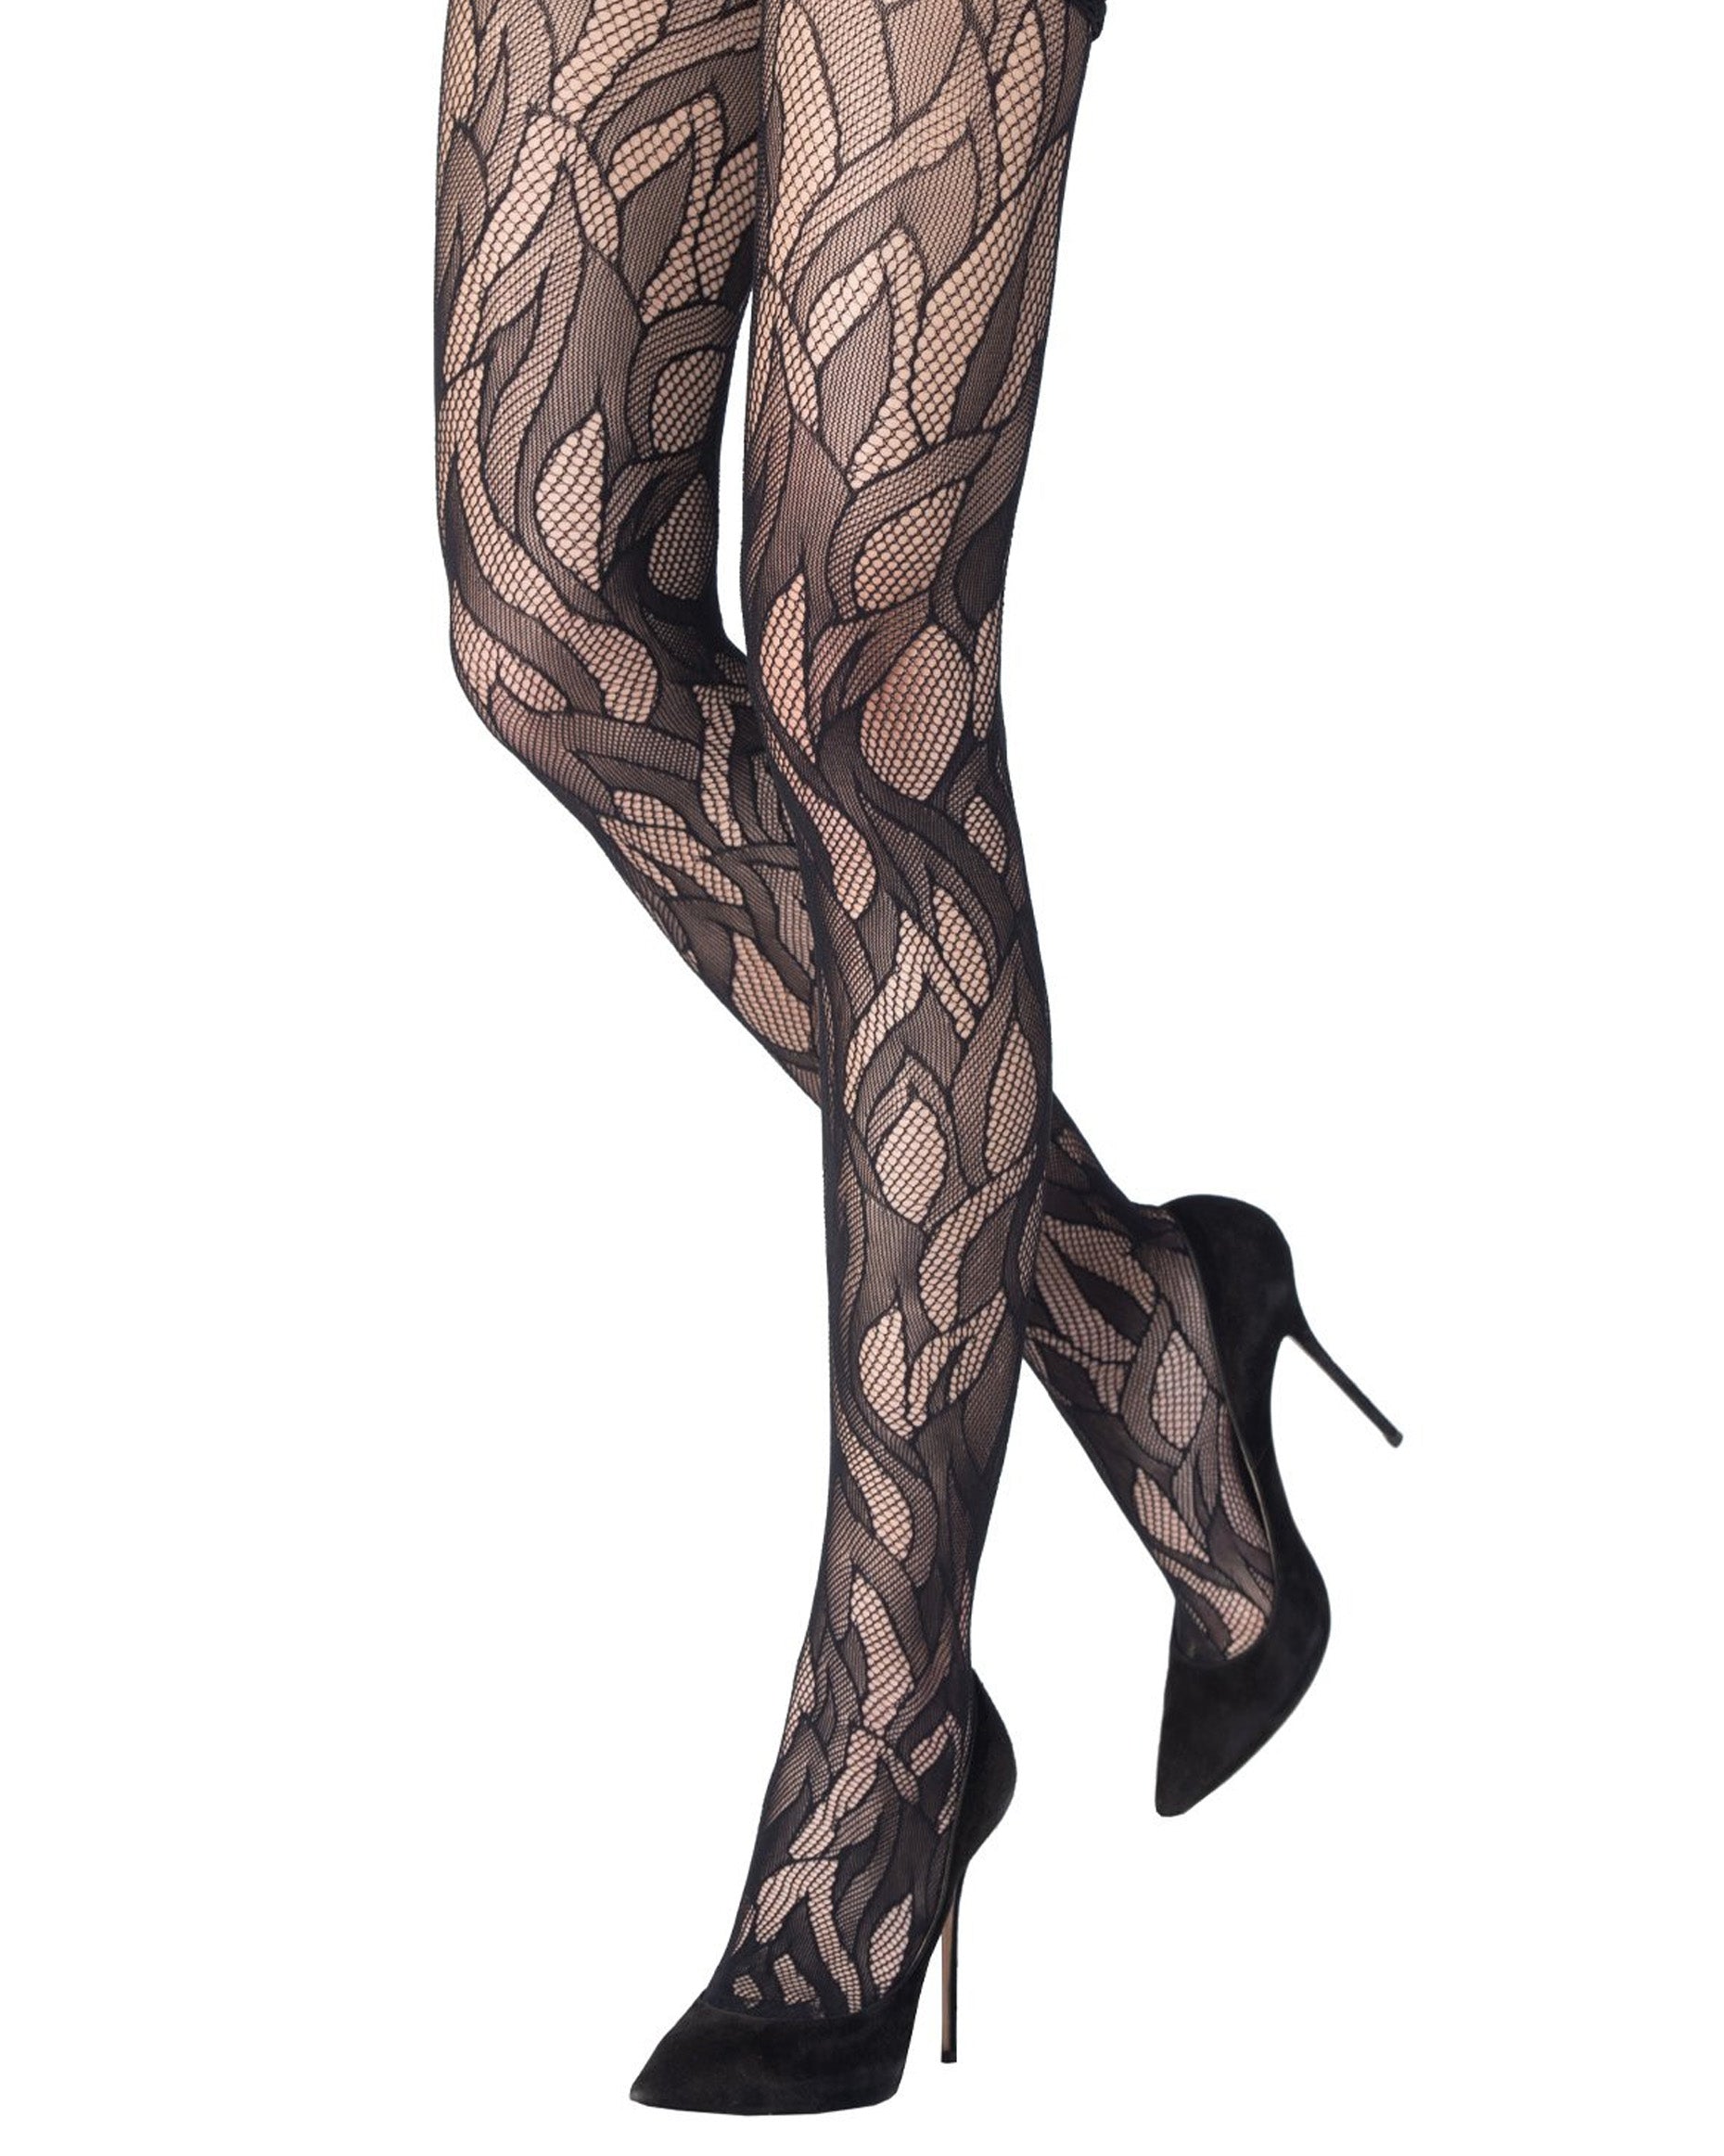 Emilio Cavallini Flames Tights - Black open fishnet tights with a stylised flame pattern worn with black high heels.